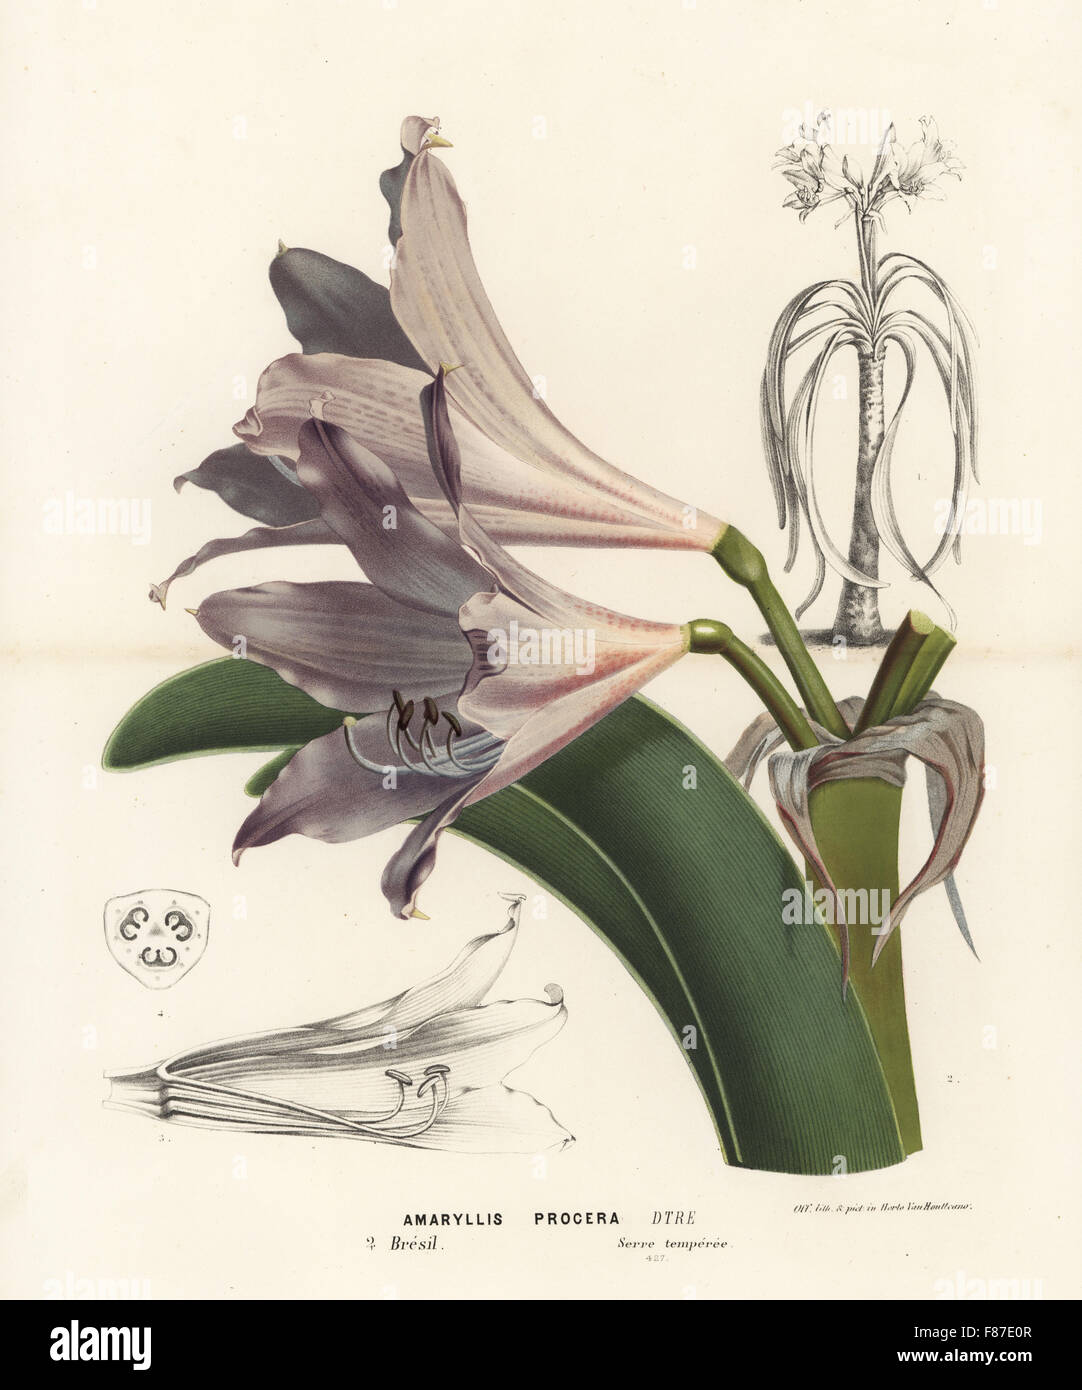 Swamp lily, Crinum erubescens (Amaryllis procera). Handcoloured lithograph from Louis van Houtte and Charles Lemaire's Flowers of the Gardens and Hothouses of Europe, Flore des Serres et des Jardins de l'Europe, Ghent, Belgium, 1874. Stock Photo